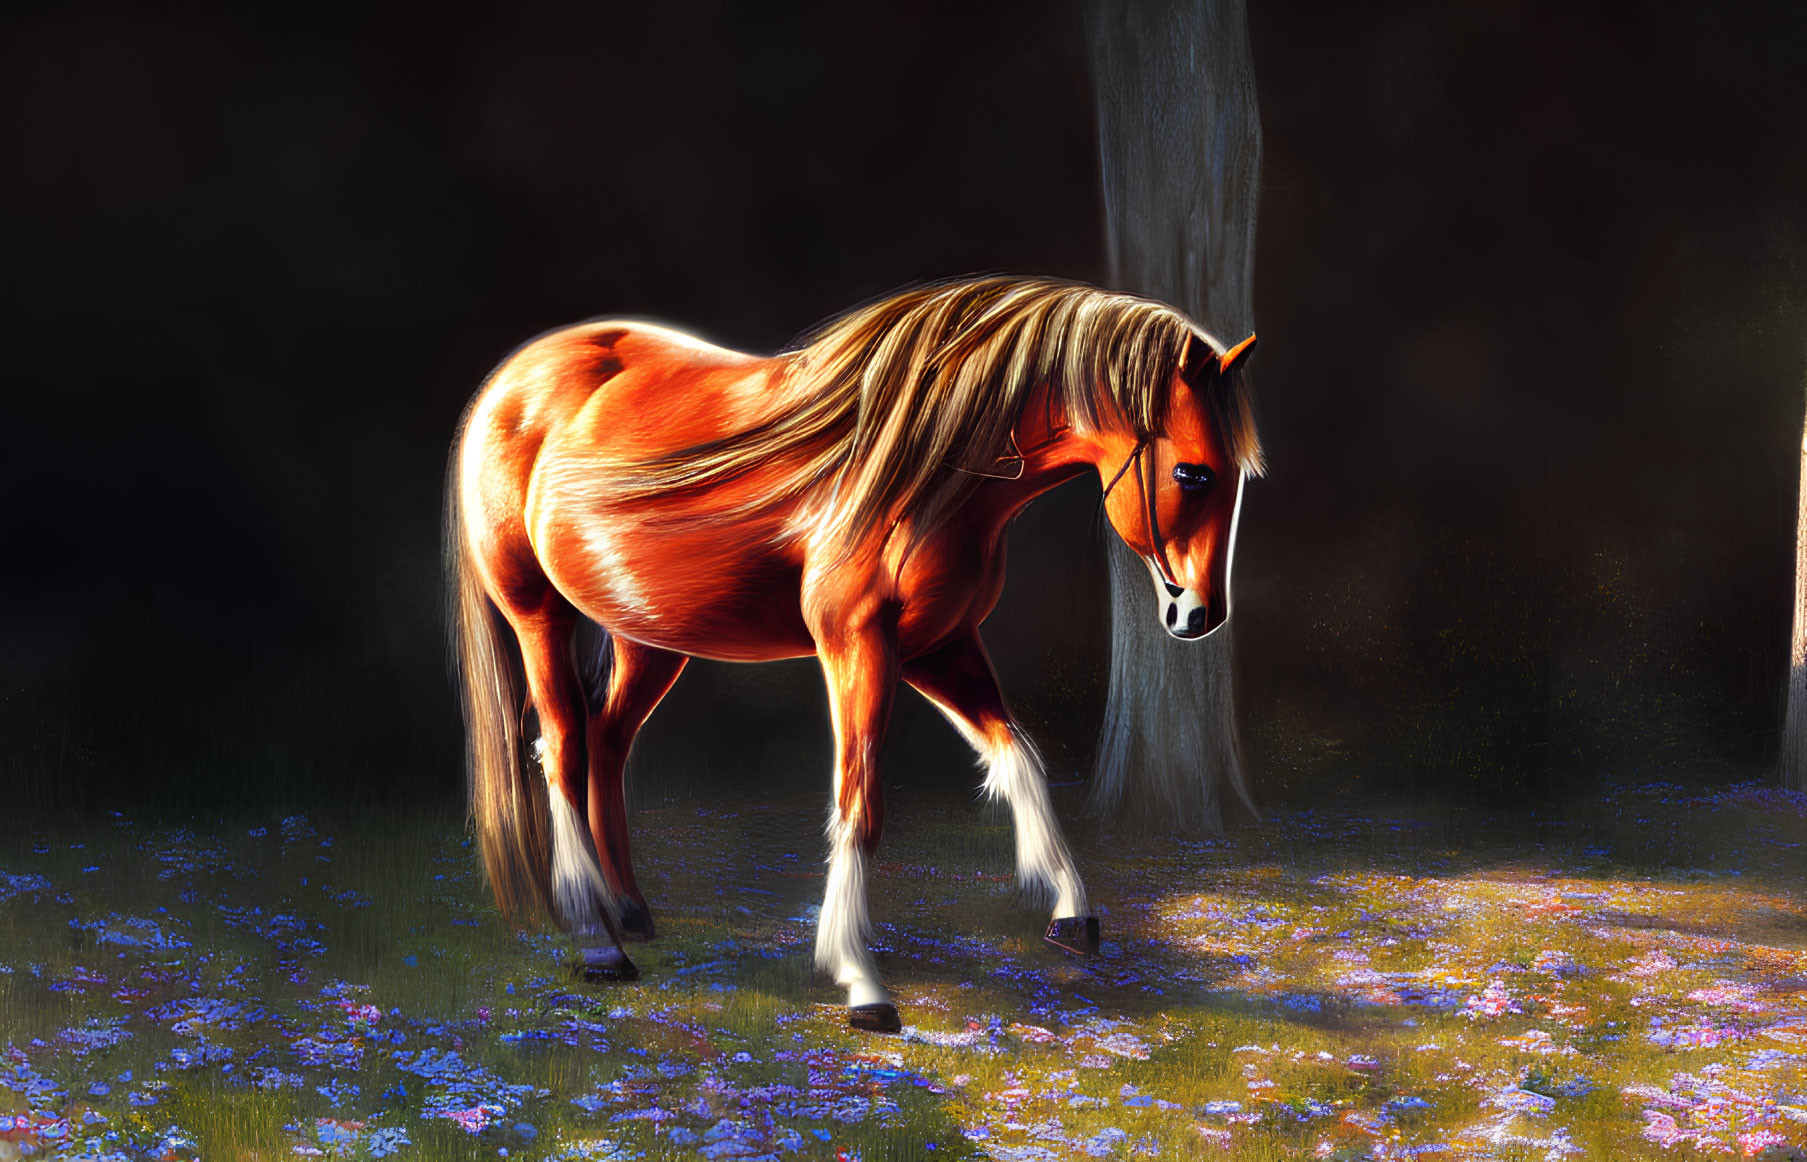 Digital Artwork: Chestnut Horse with Glowing Mane in Mystical Forest Clearing